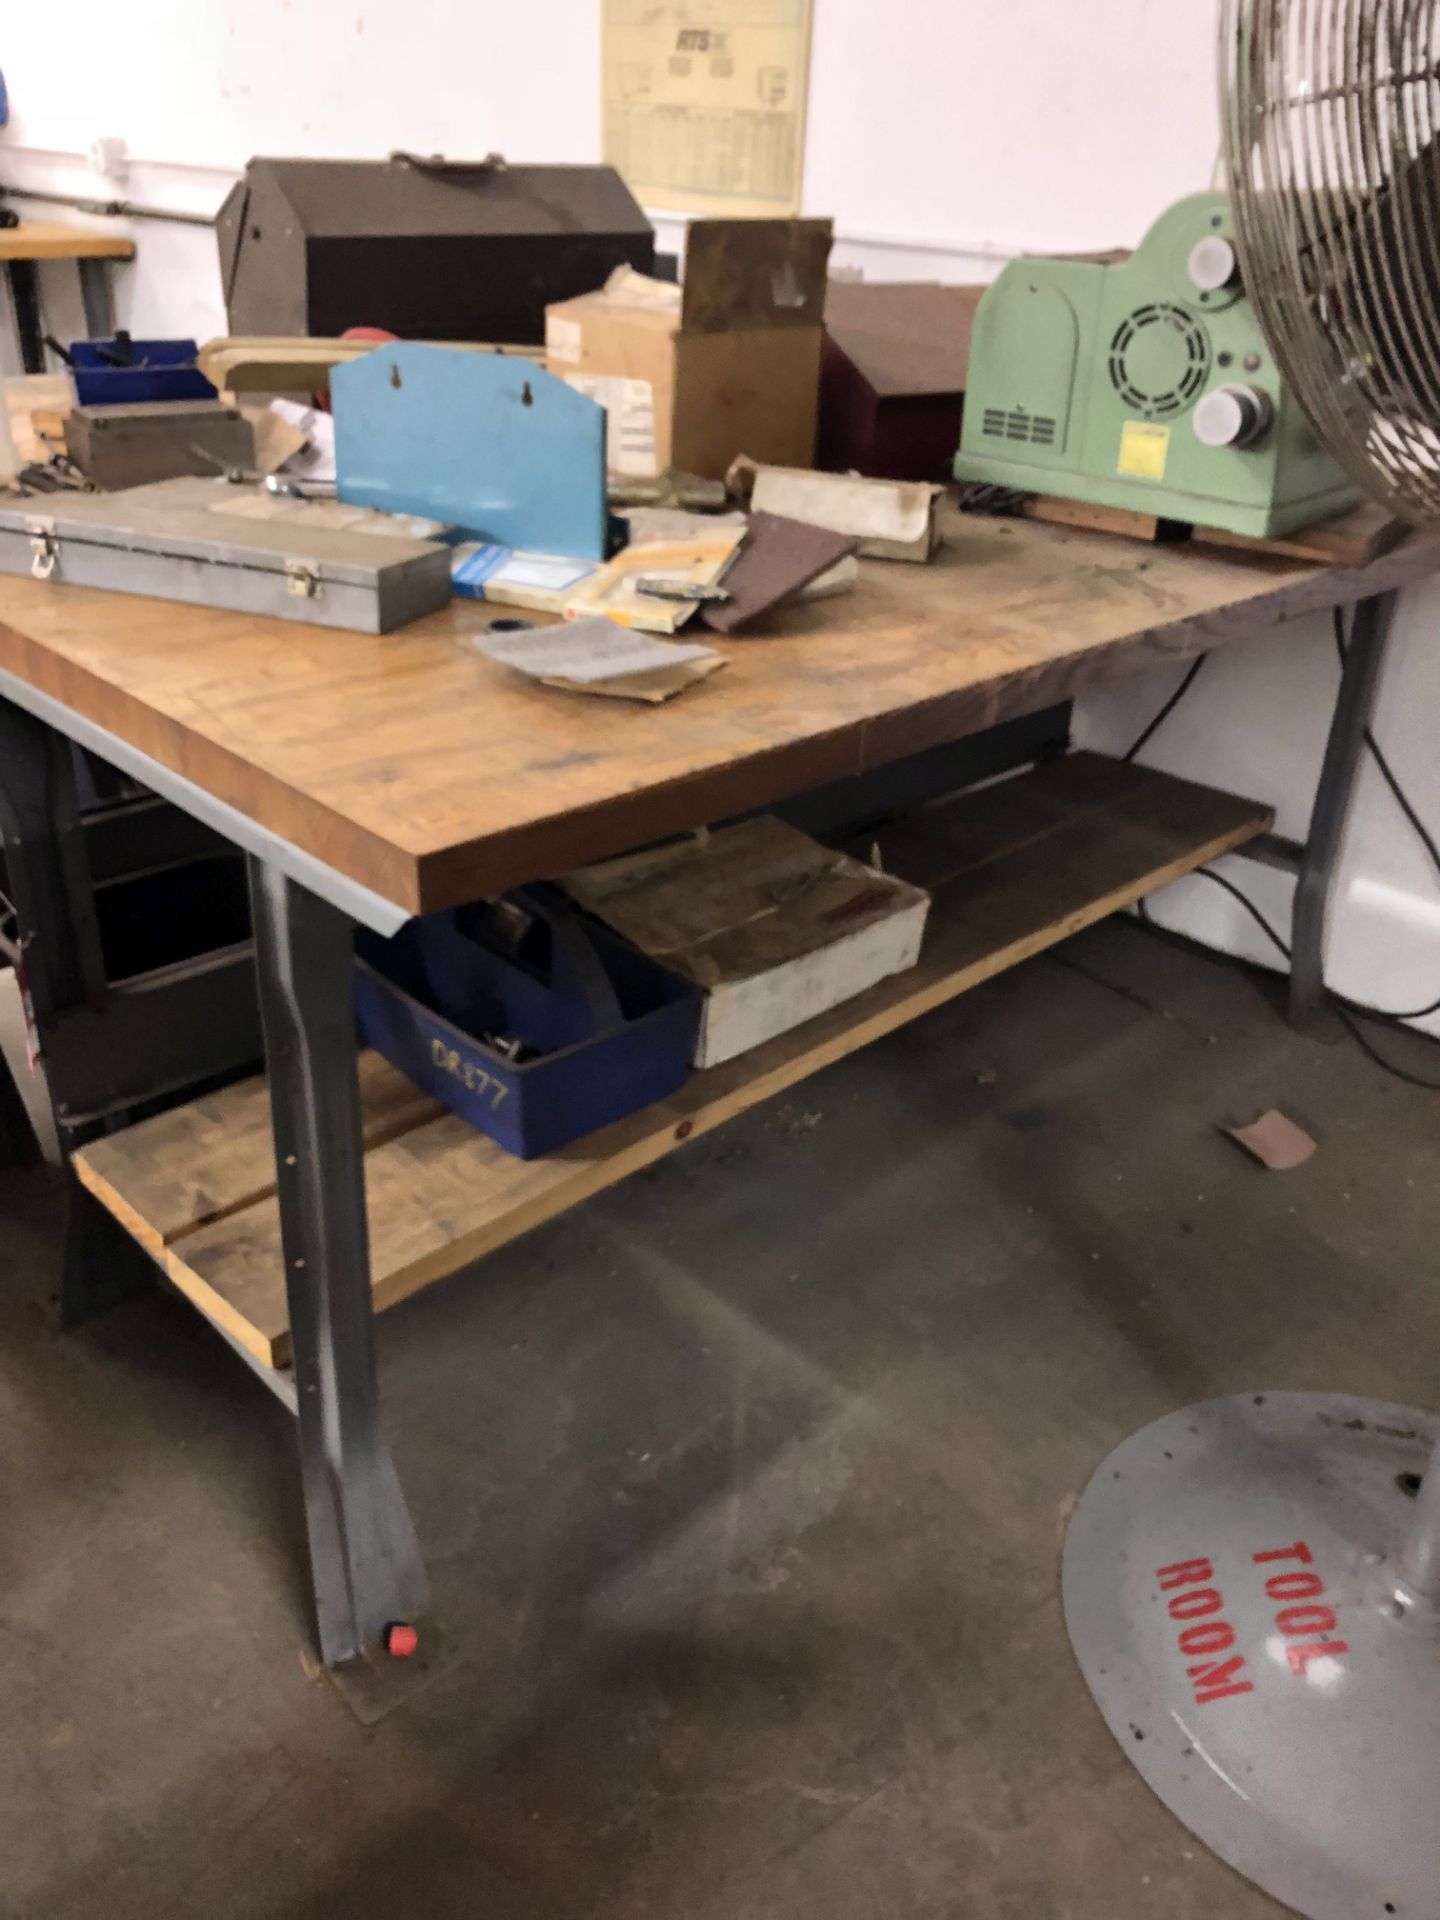 METAL WORK BENCH WITH WOOD TOP, 6' LONG x 3' WIDE x 34'' TALL [CONTENTS ON BENCH NOT INCLUDED] [